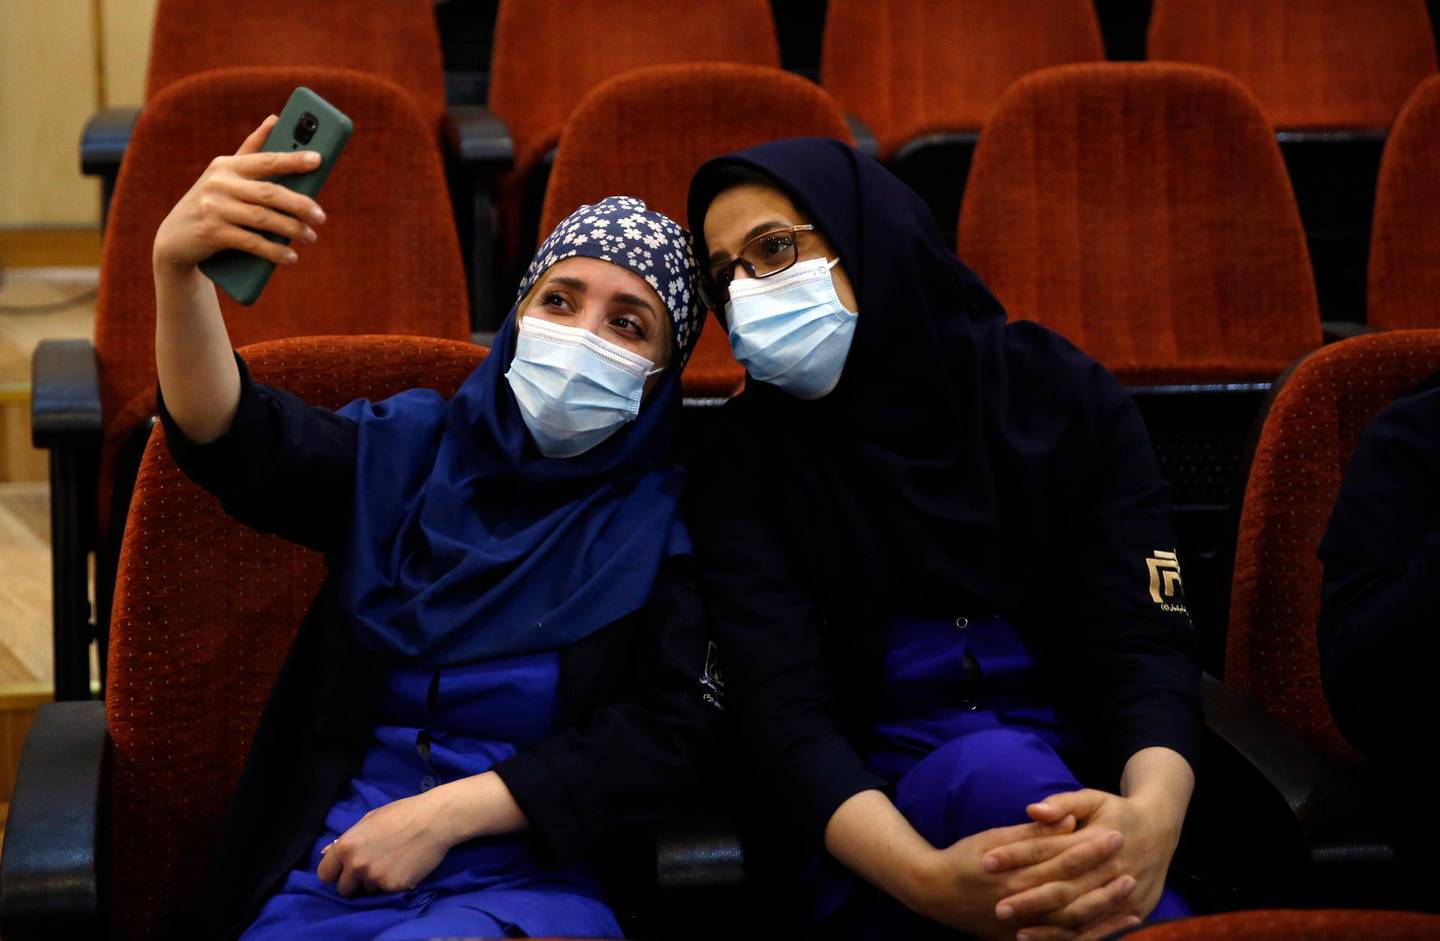 epa08998250 Iranian health workers take selfie before getting Sputnik V Covid-19 vaccine during a ceremony at the Imam Khomeini hospital in Tehran, Iran, 09 February 2021. Iran started its COVID-19 vaccination after receiving the first package of Russian Sputnik V vaccine.  EPA/ABEDIN TAHERKENAREH